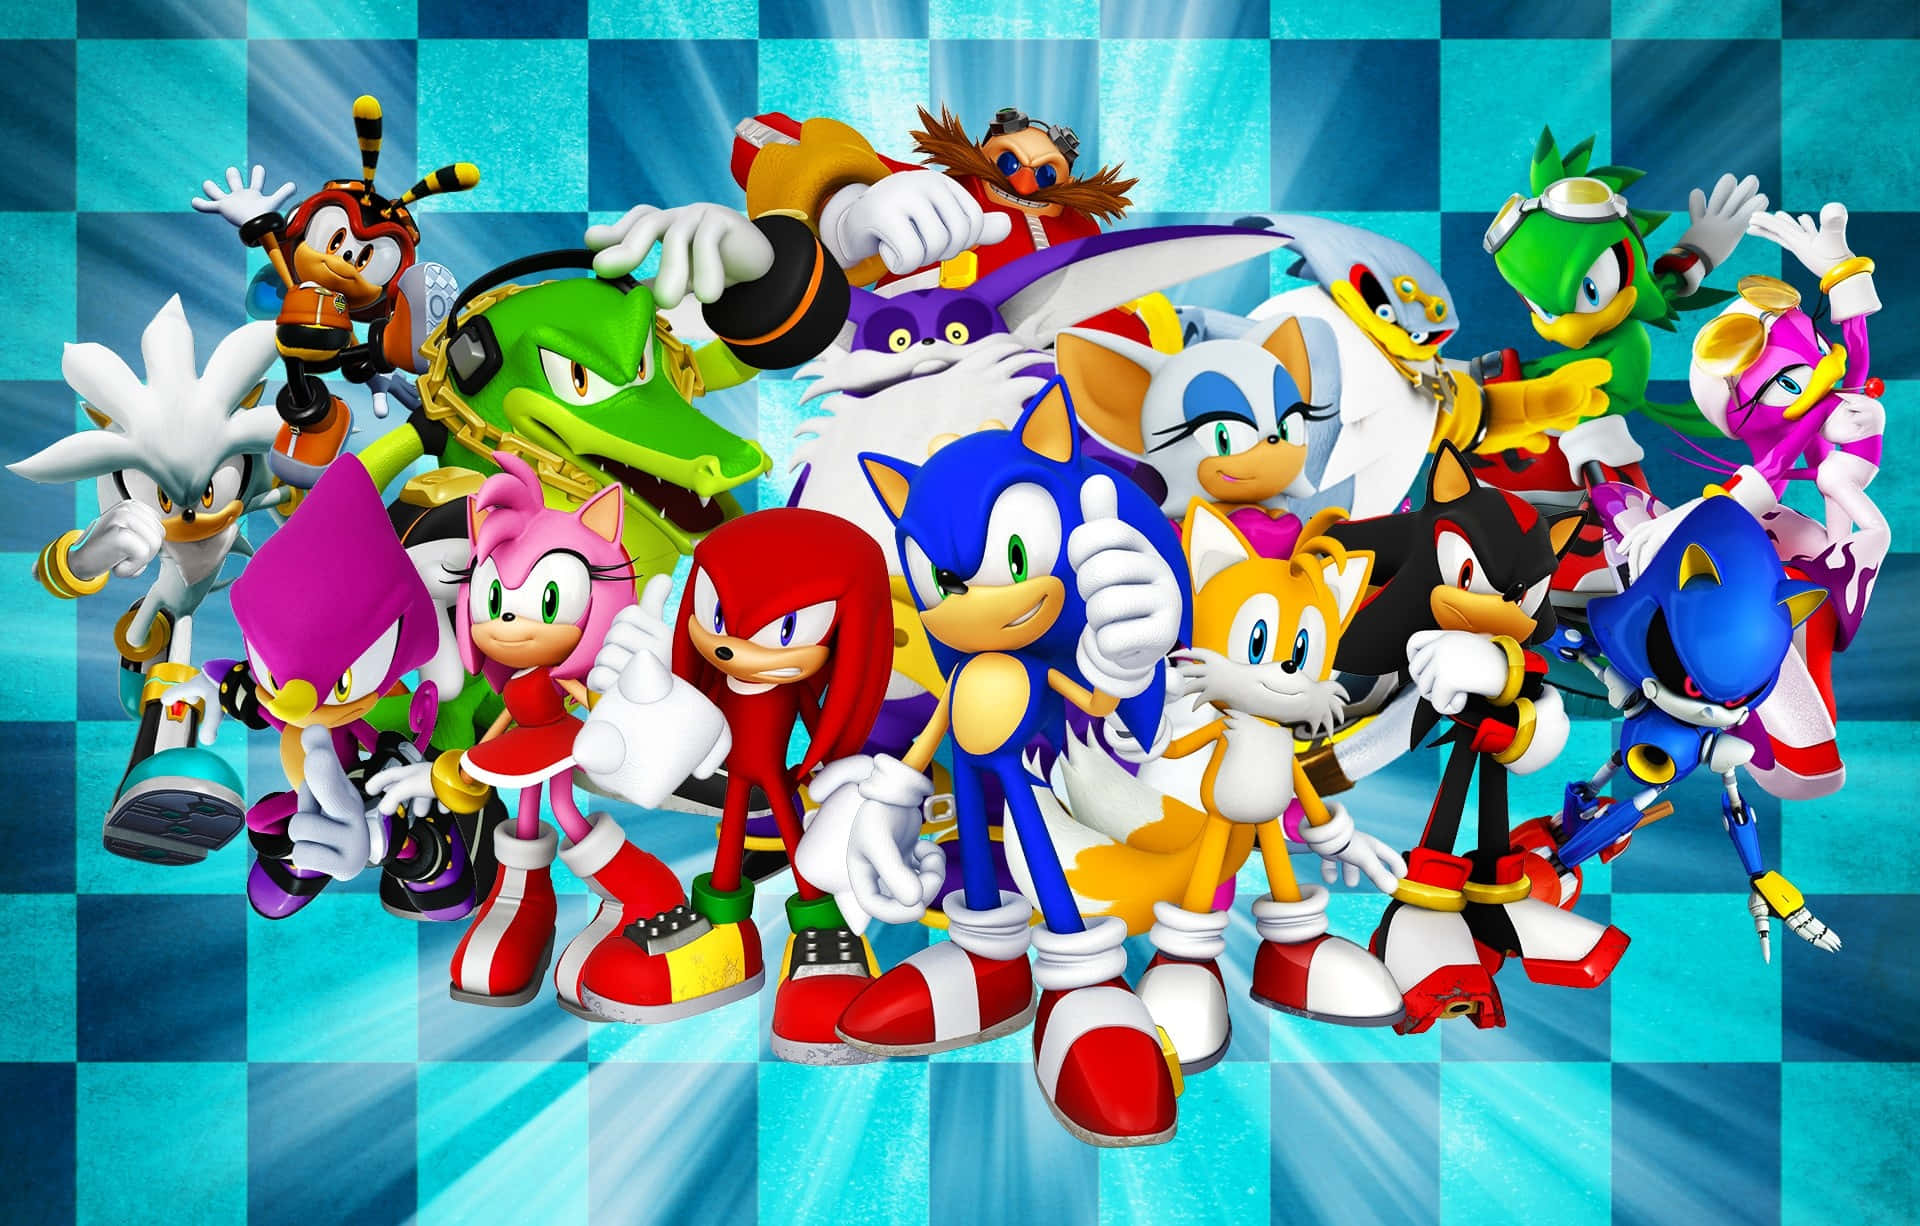 Sonic and friends assemble for an epic adventure Wallpaper